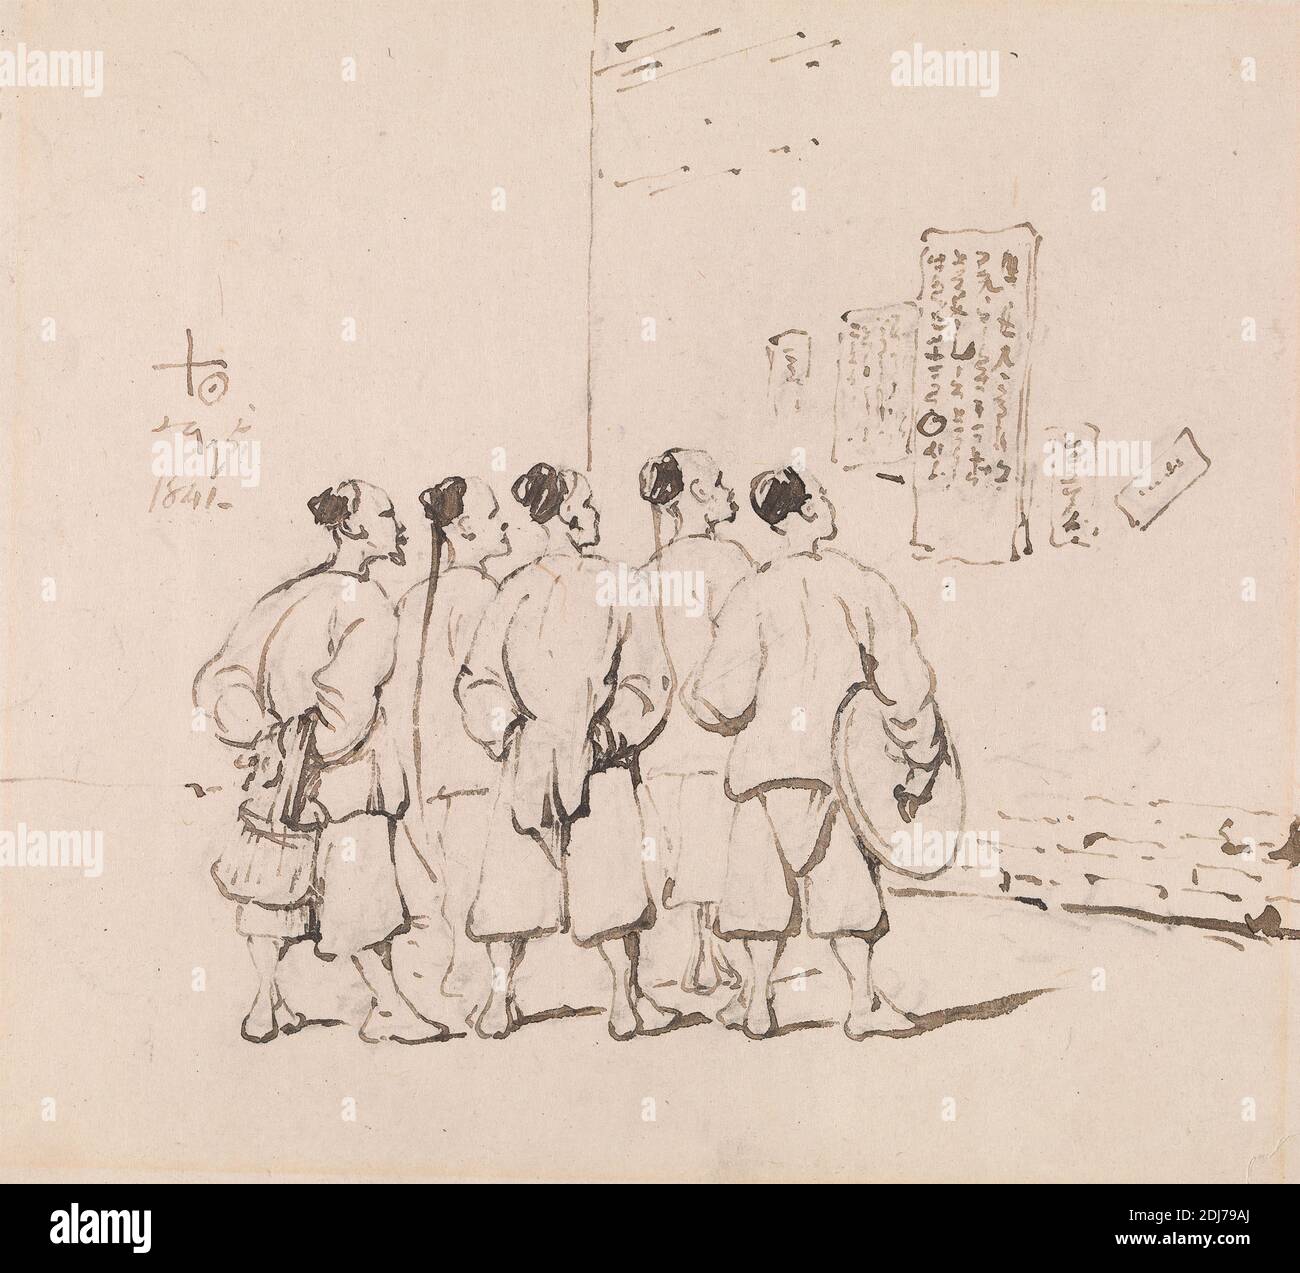 Chinese Coolies reading a Proclamation, George Chinnery, 1774–1852, British, 1841, Graphite, pen and brown ink on medium, slightly textured, cream wove paper, Sheet: 6 × 6 5/8 inches (15.2 × 16.8 cm), figure study, proclamation, workers Stock Photo